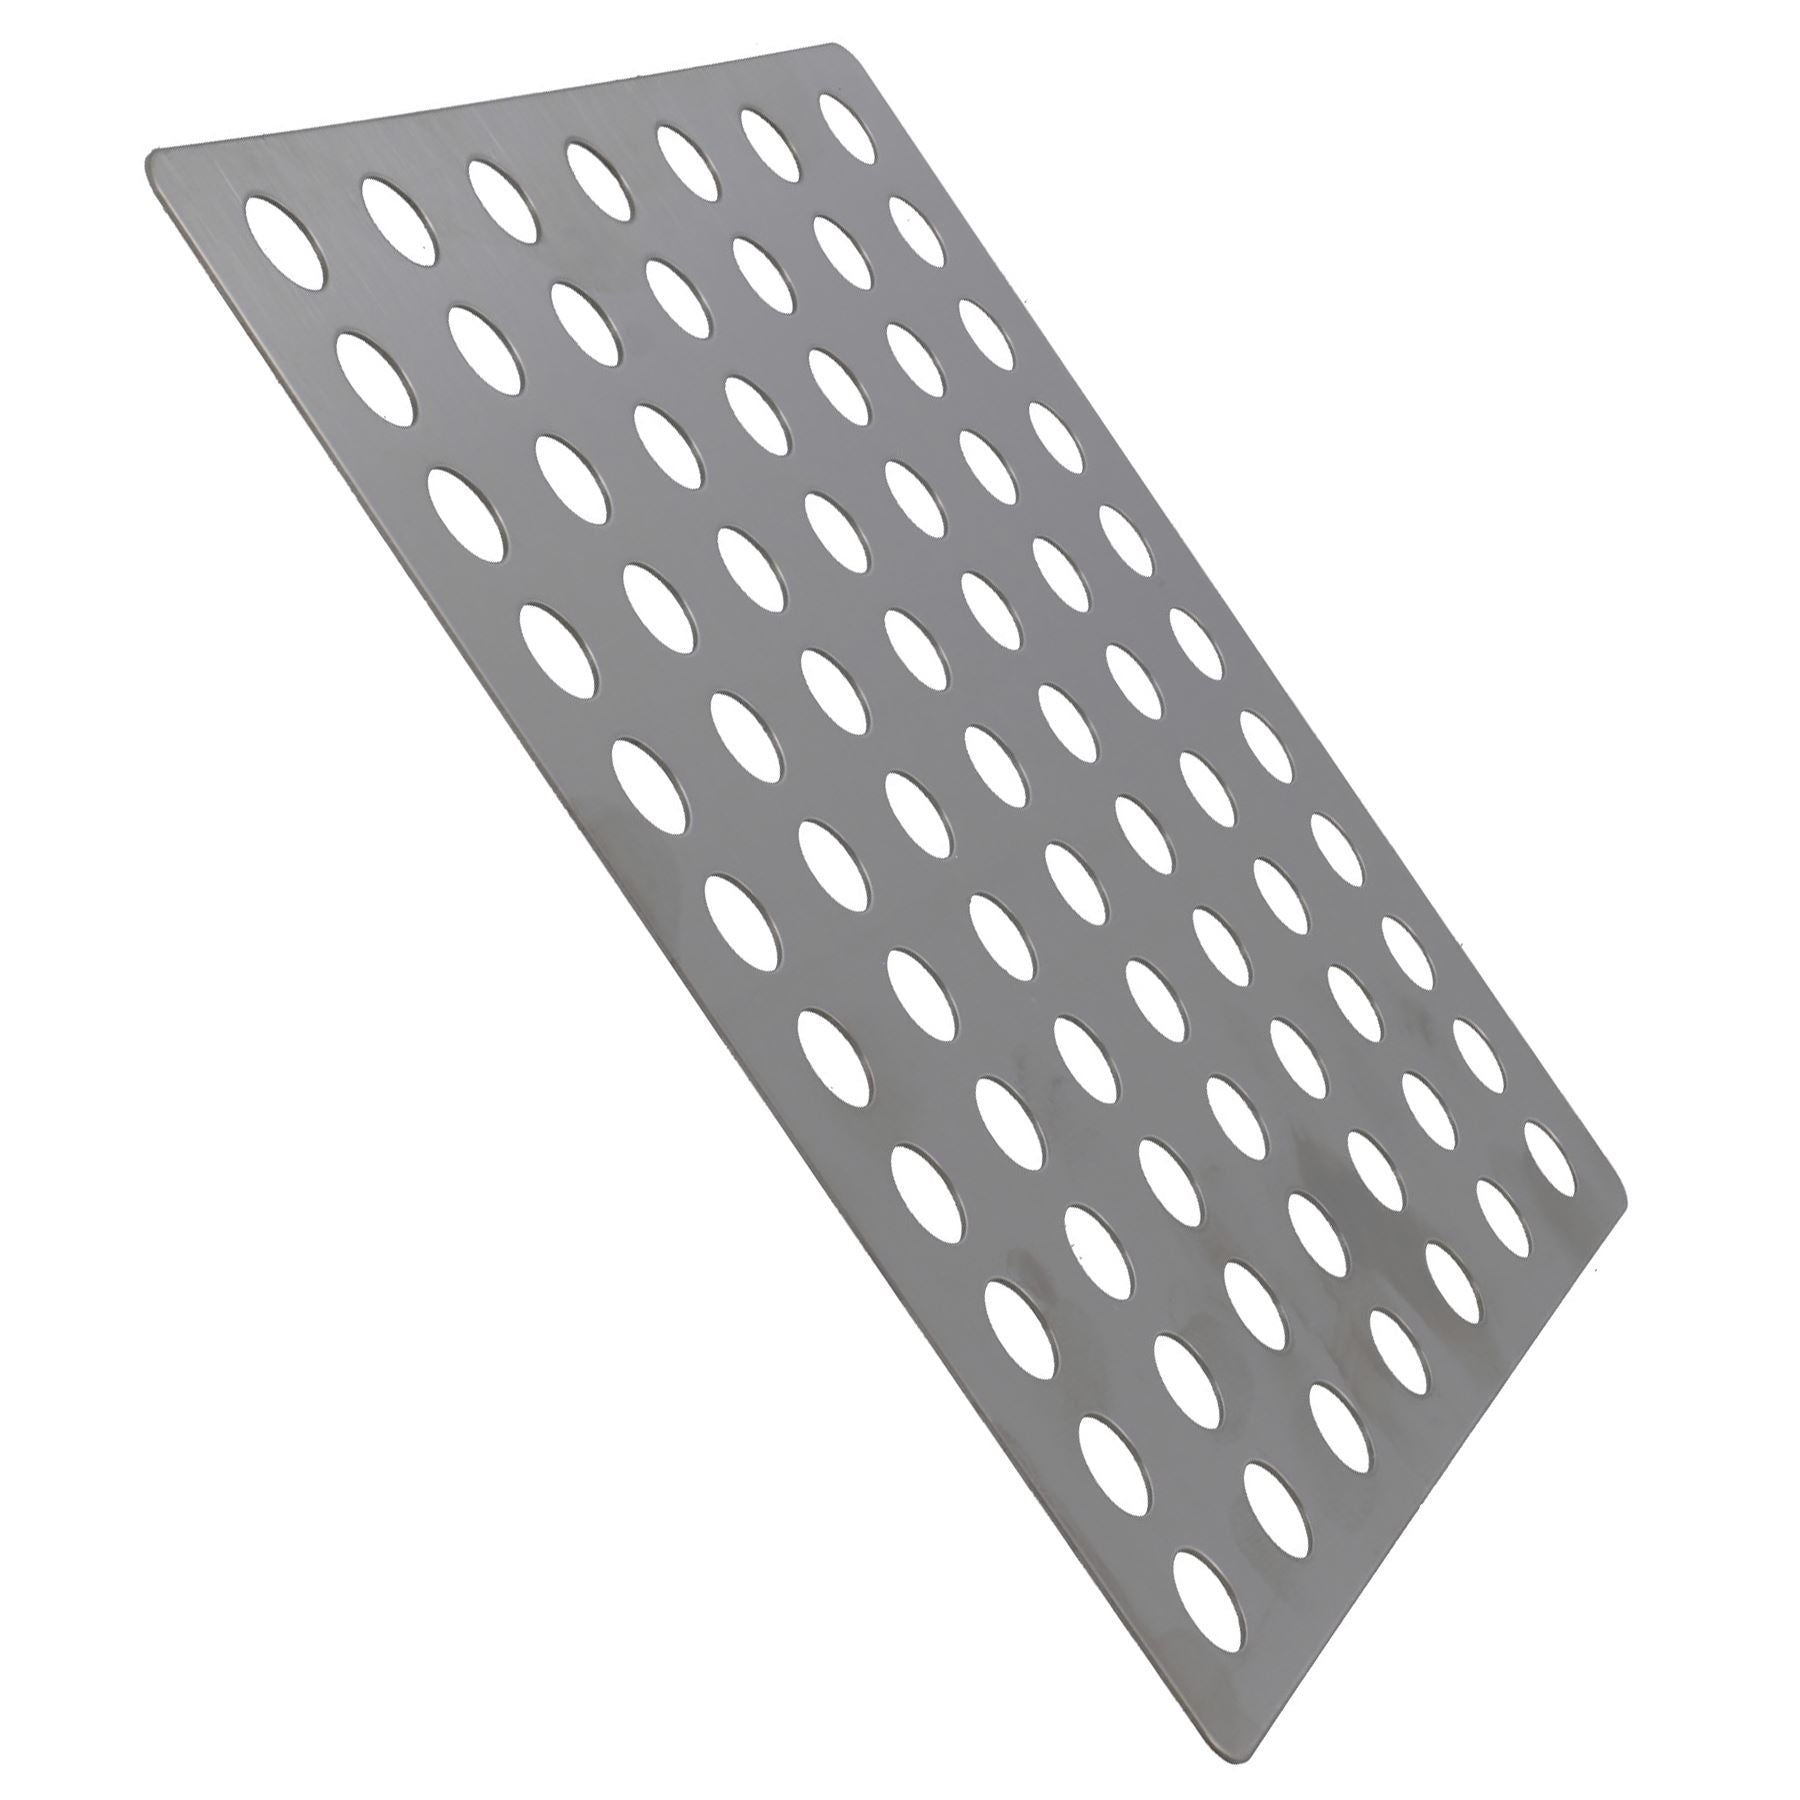 Stainless Steel Flat Drain Guard Cover Plate Grid 150mm x 150mm Rustproof